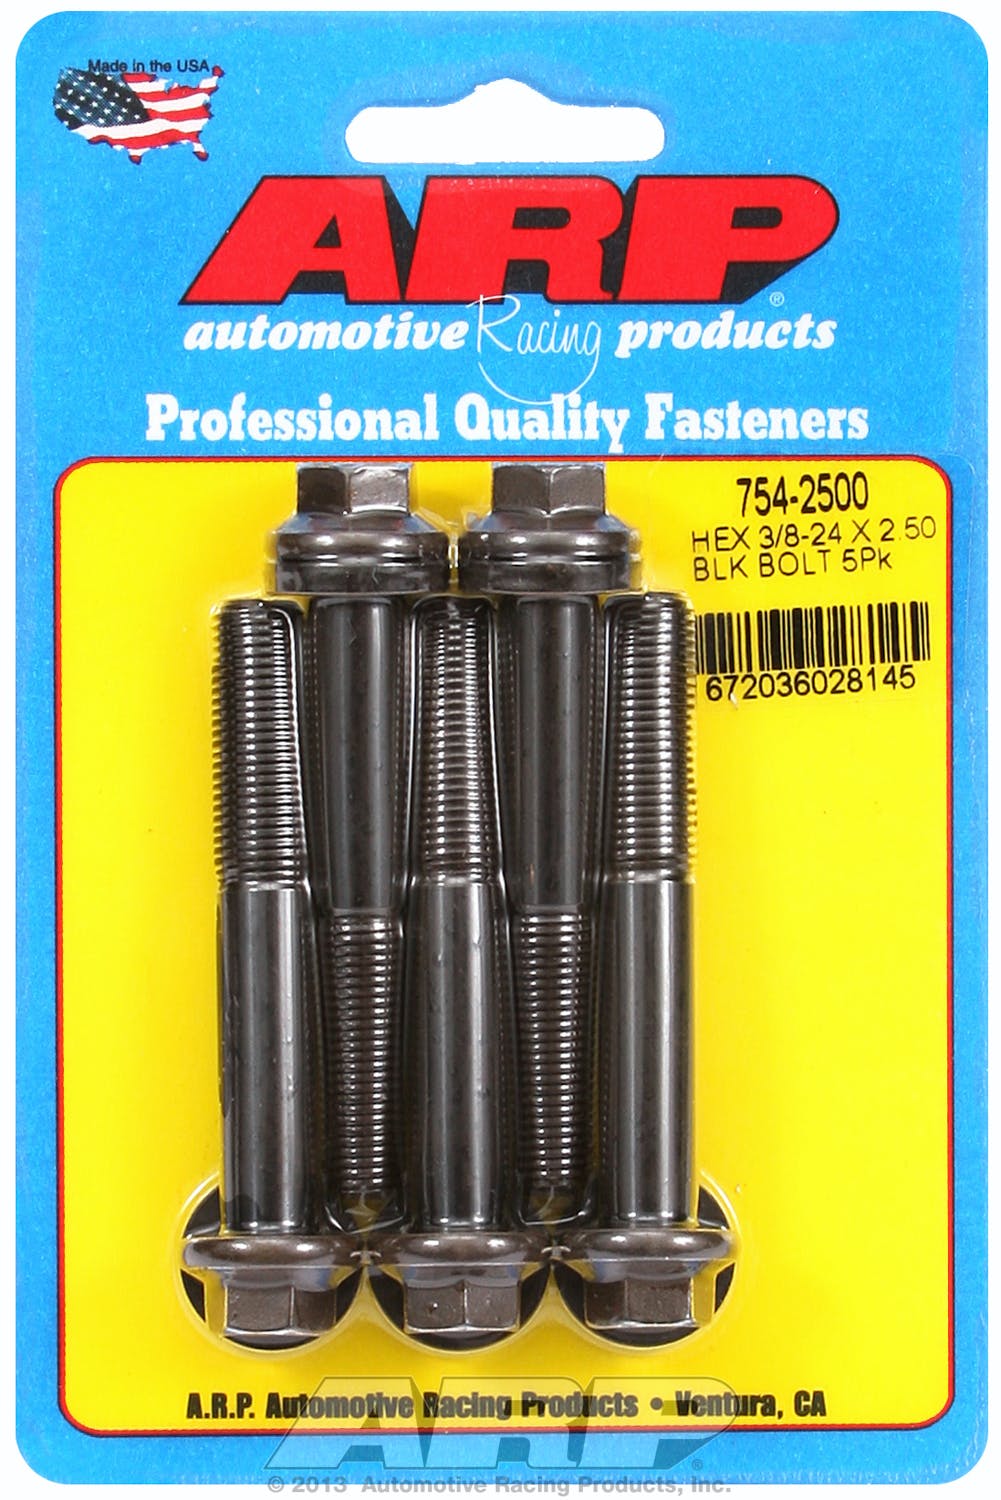 ARP 754-2500 3/8-24 x 2.500 hex 7/16 wrenching black oxide bolts